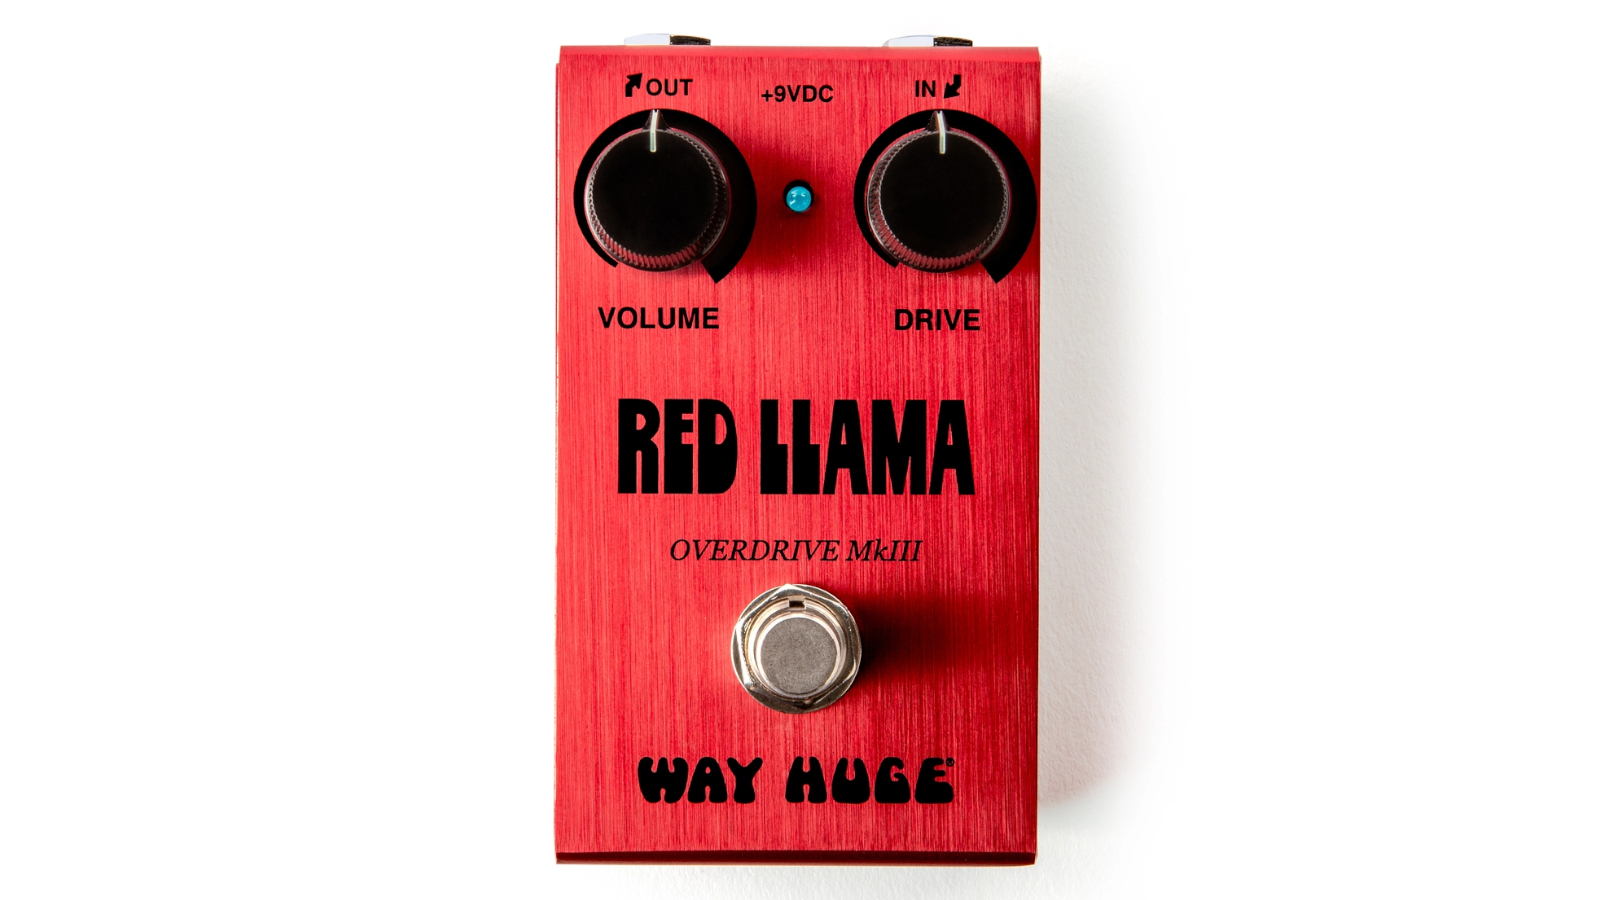 Way Huge celebrates 30th anniversary with the Red Llama Overdrive